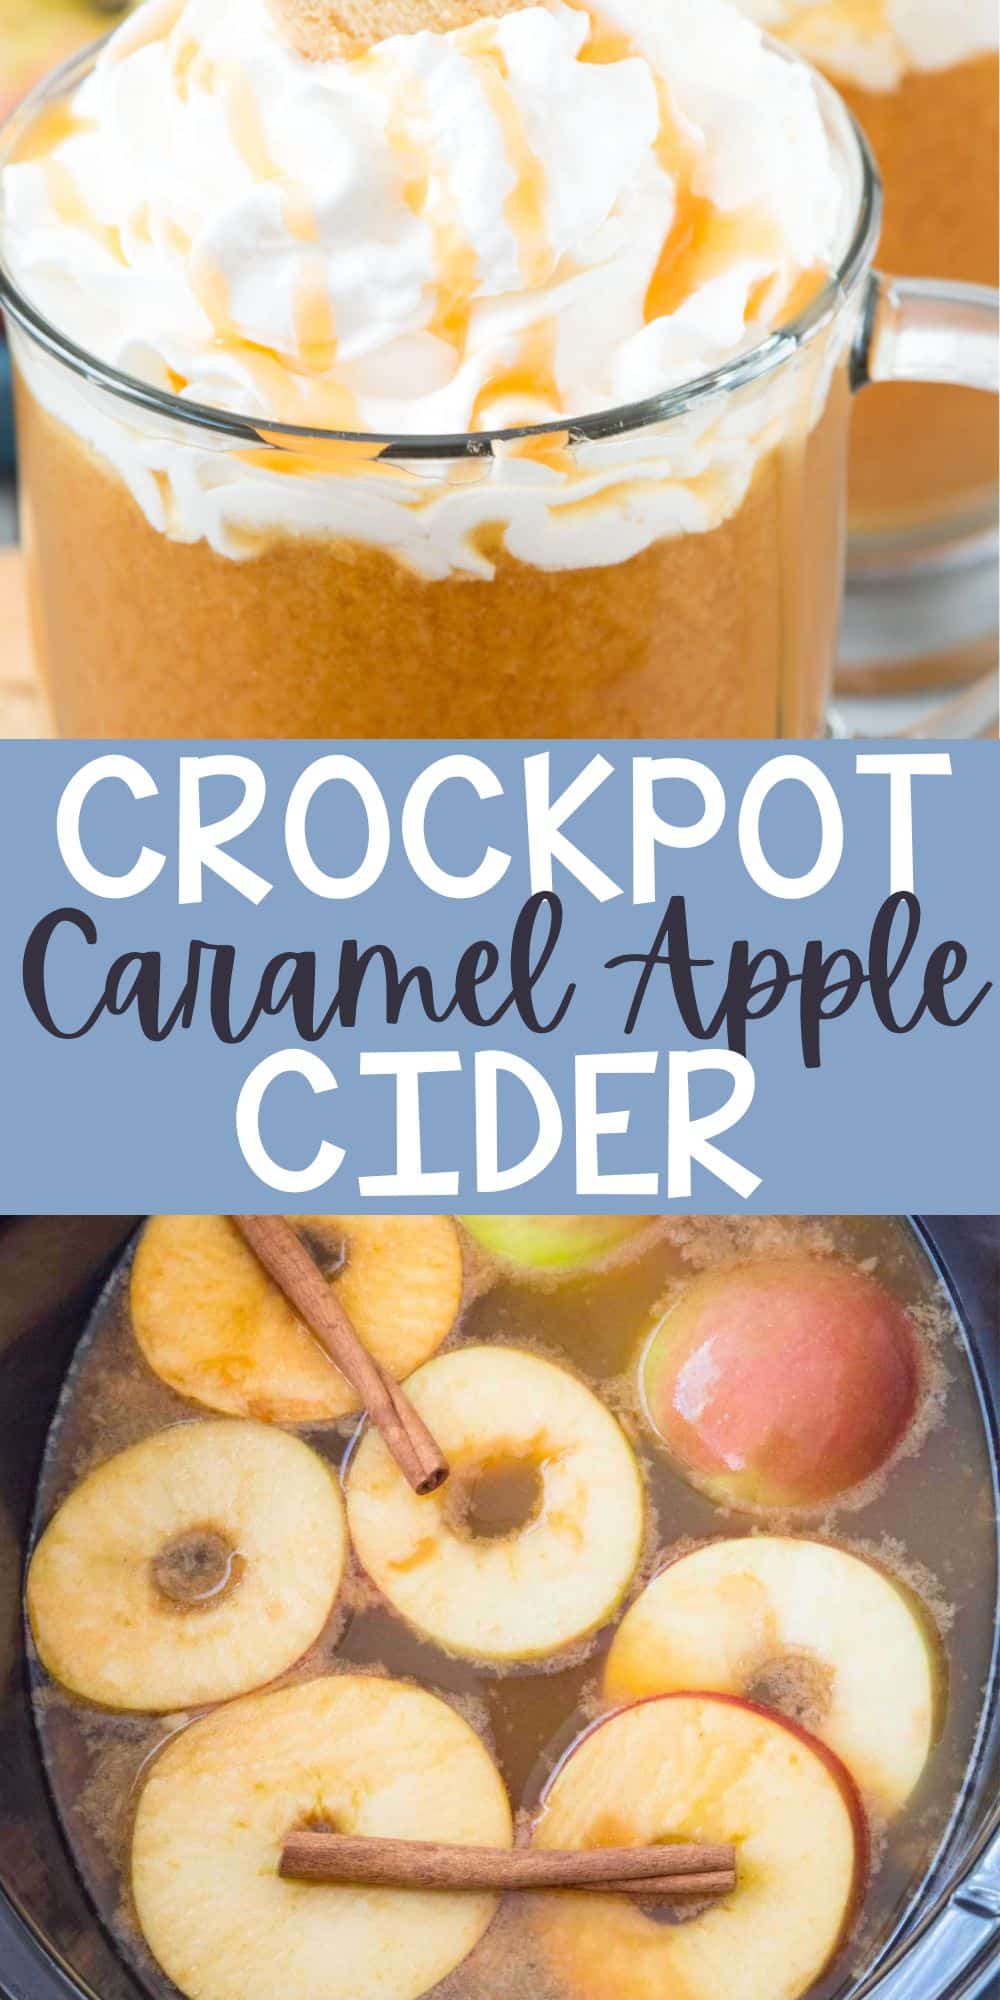 two photos of cider in a clear glass with whipped cream on top with words on the image.